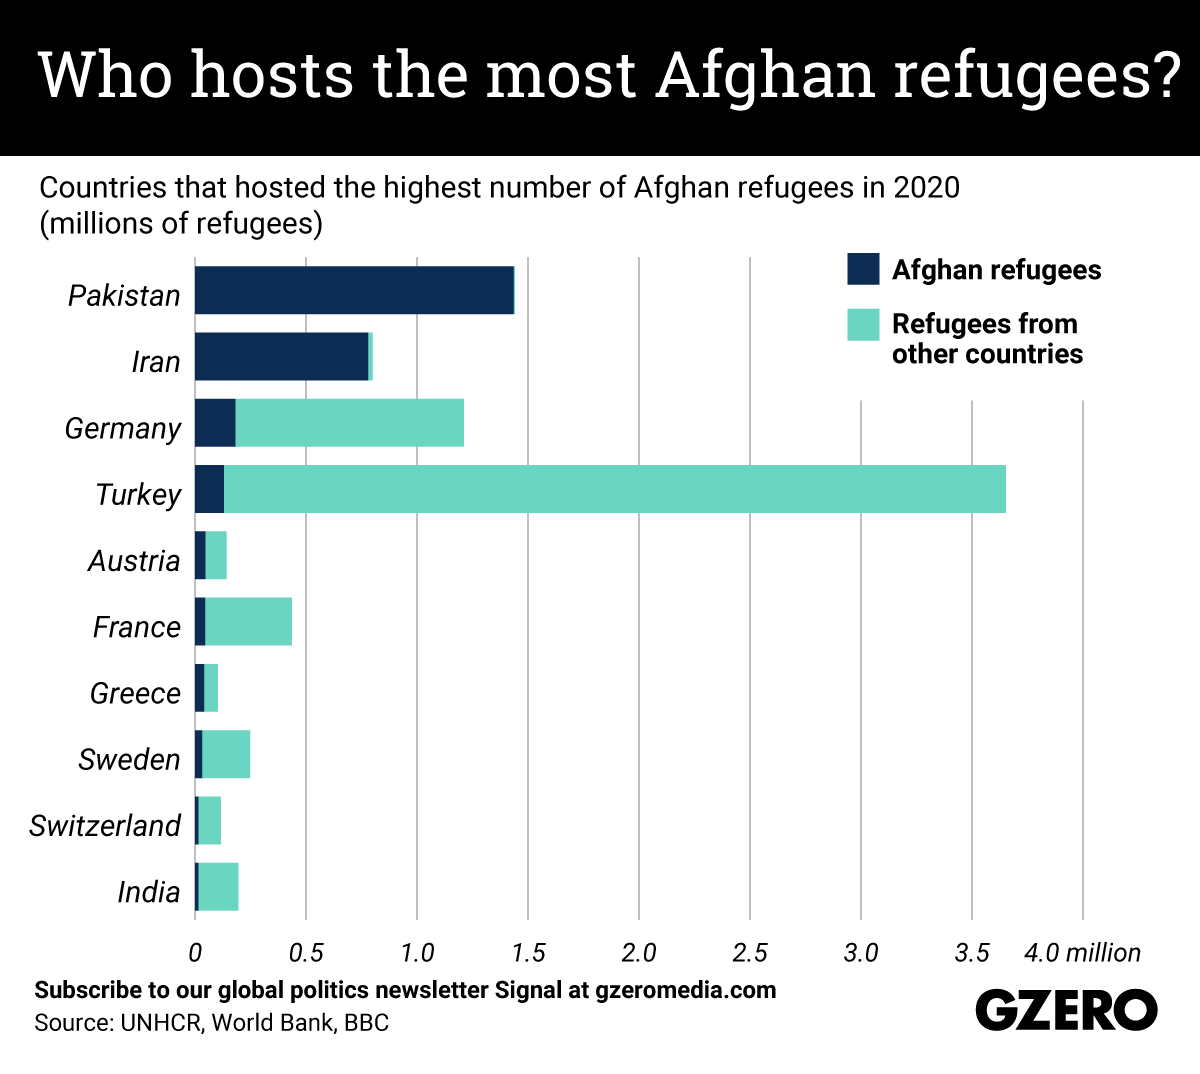 Countries that hosted the highest number of Afghan refugees in 2020 (millions of refugees)